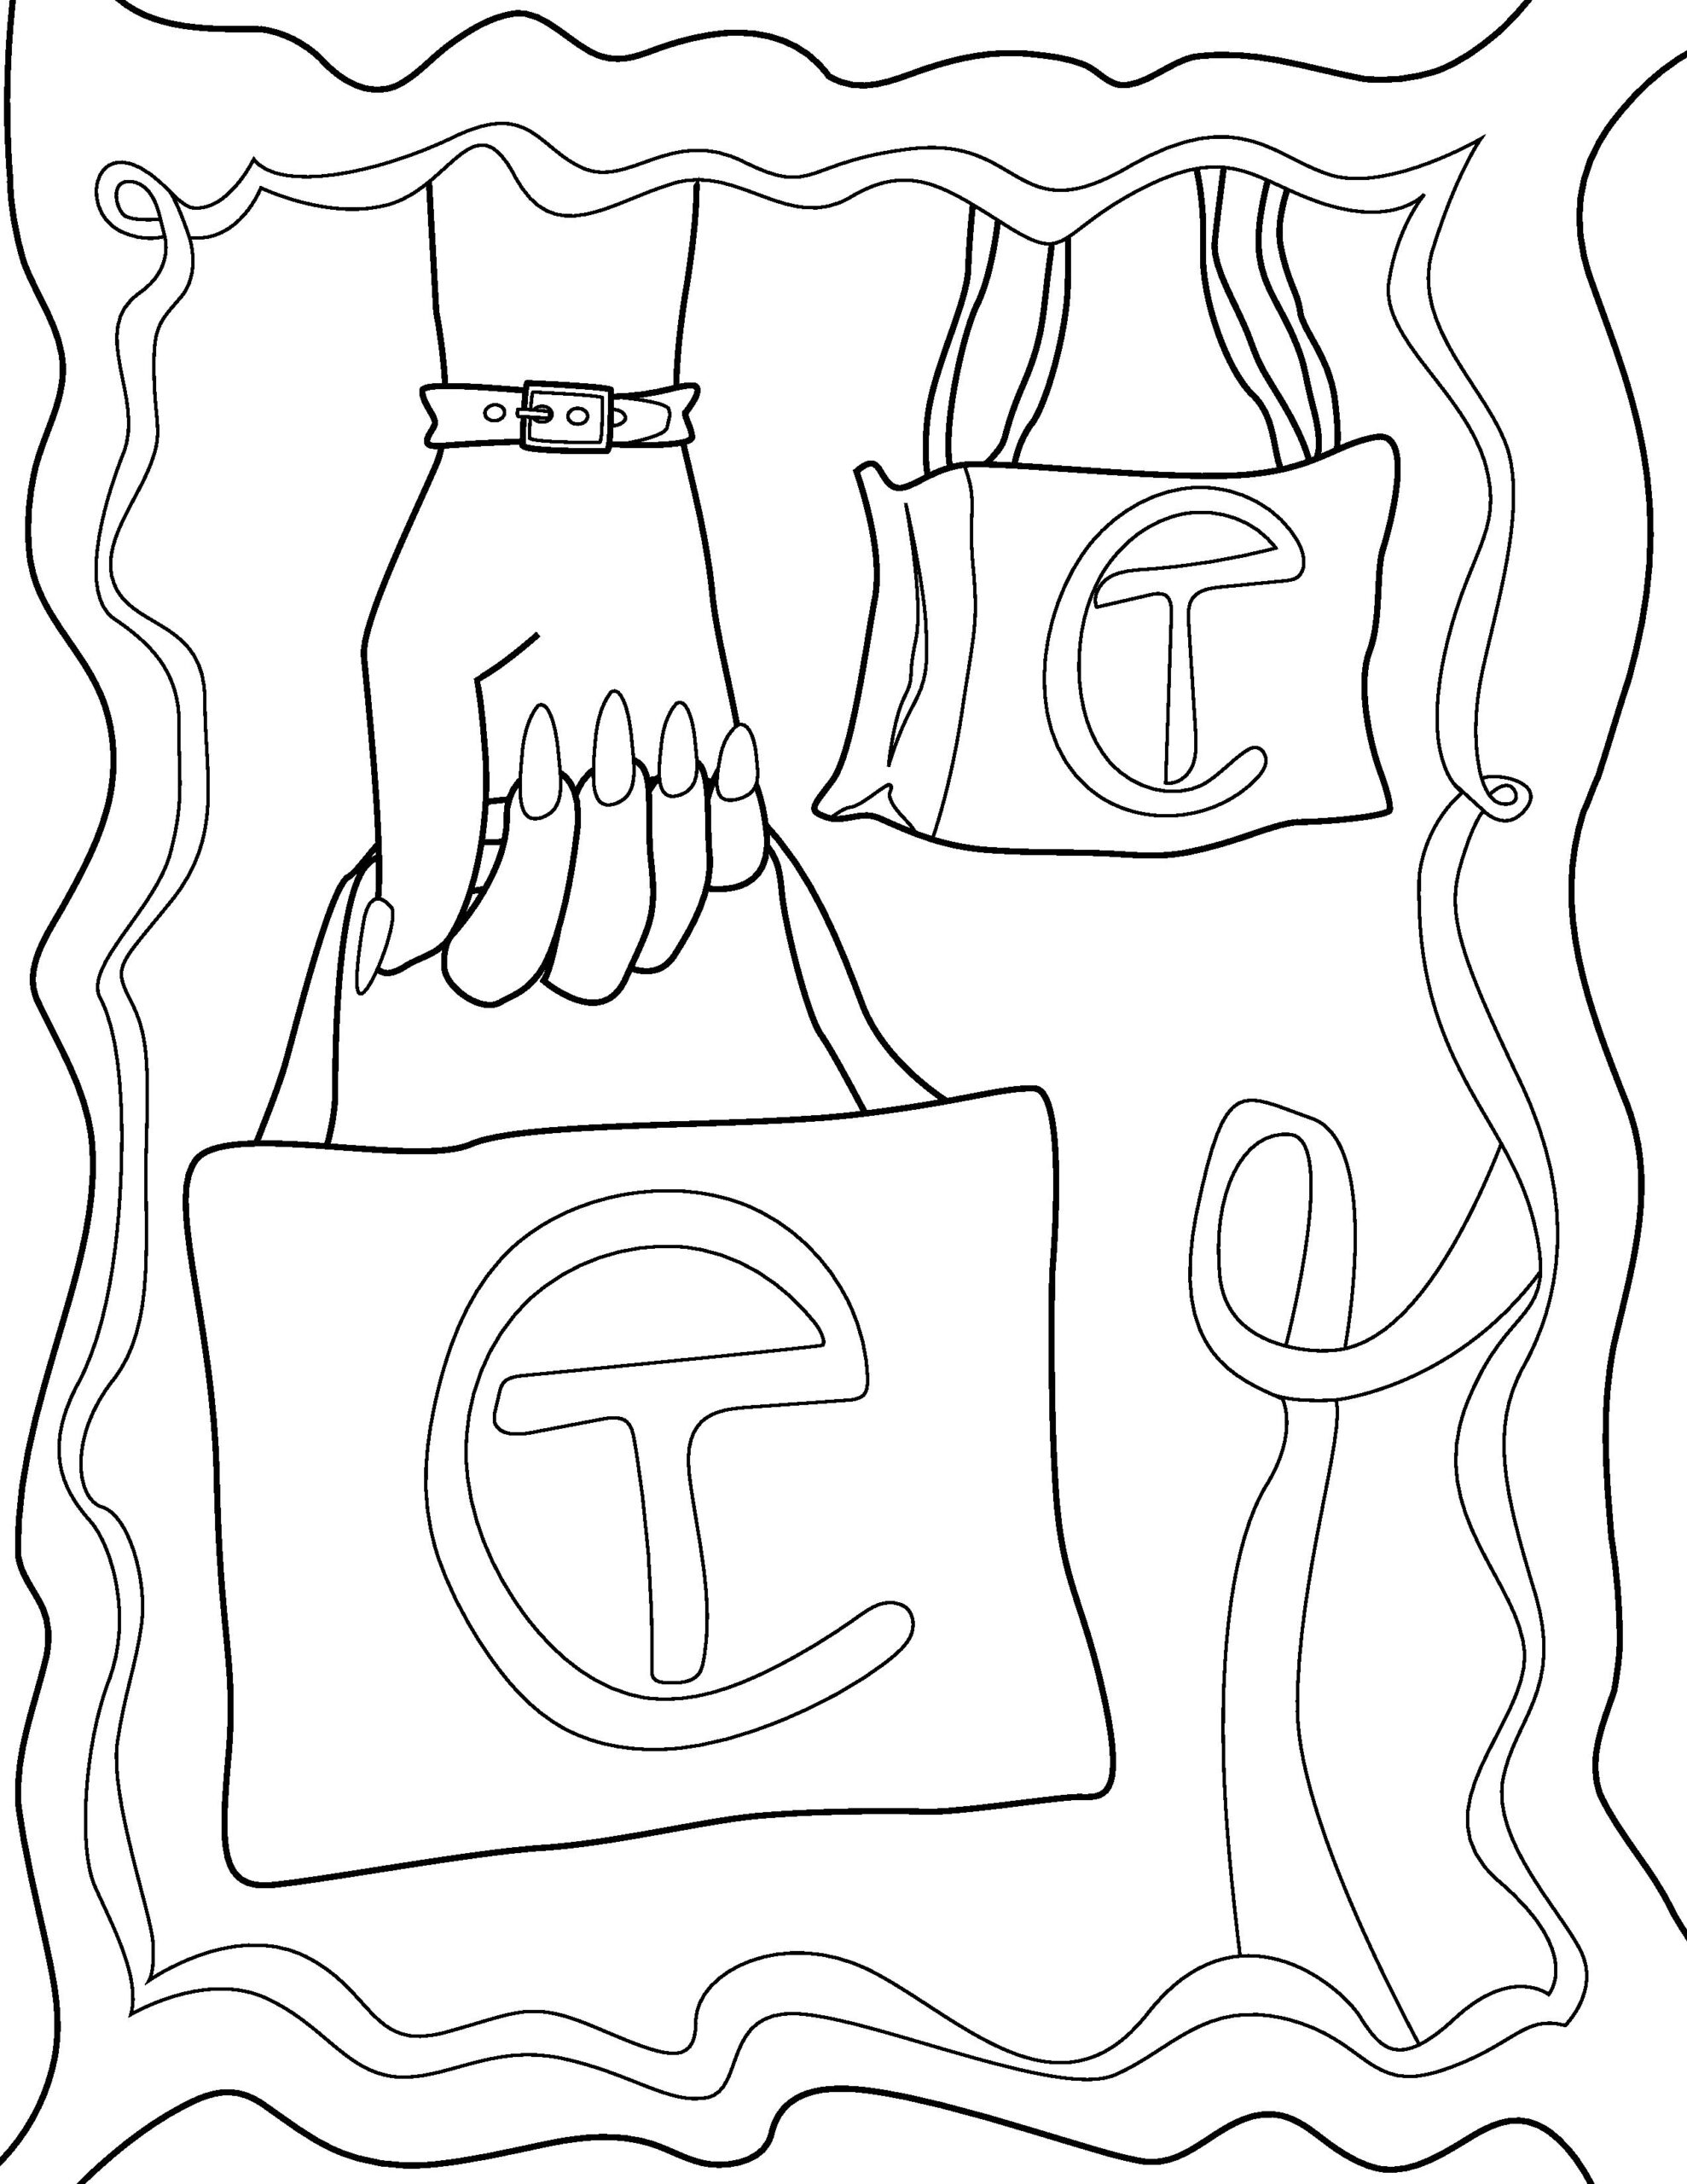 Colouring page illustration of Telfar Shopping Bag, shown twice: once held by a hand wearing a bracelet, once by itself.